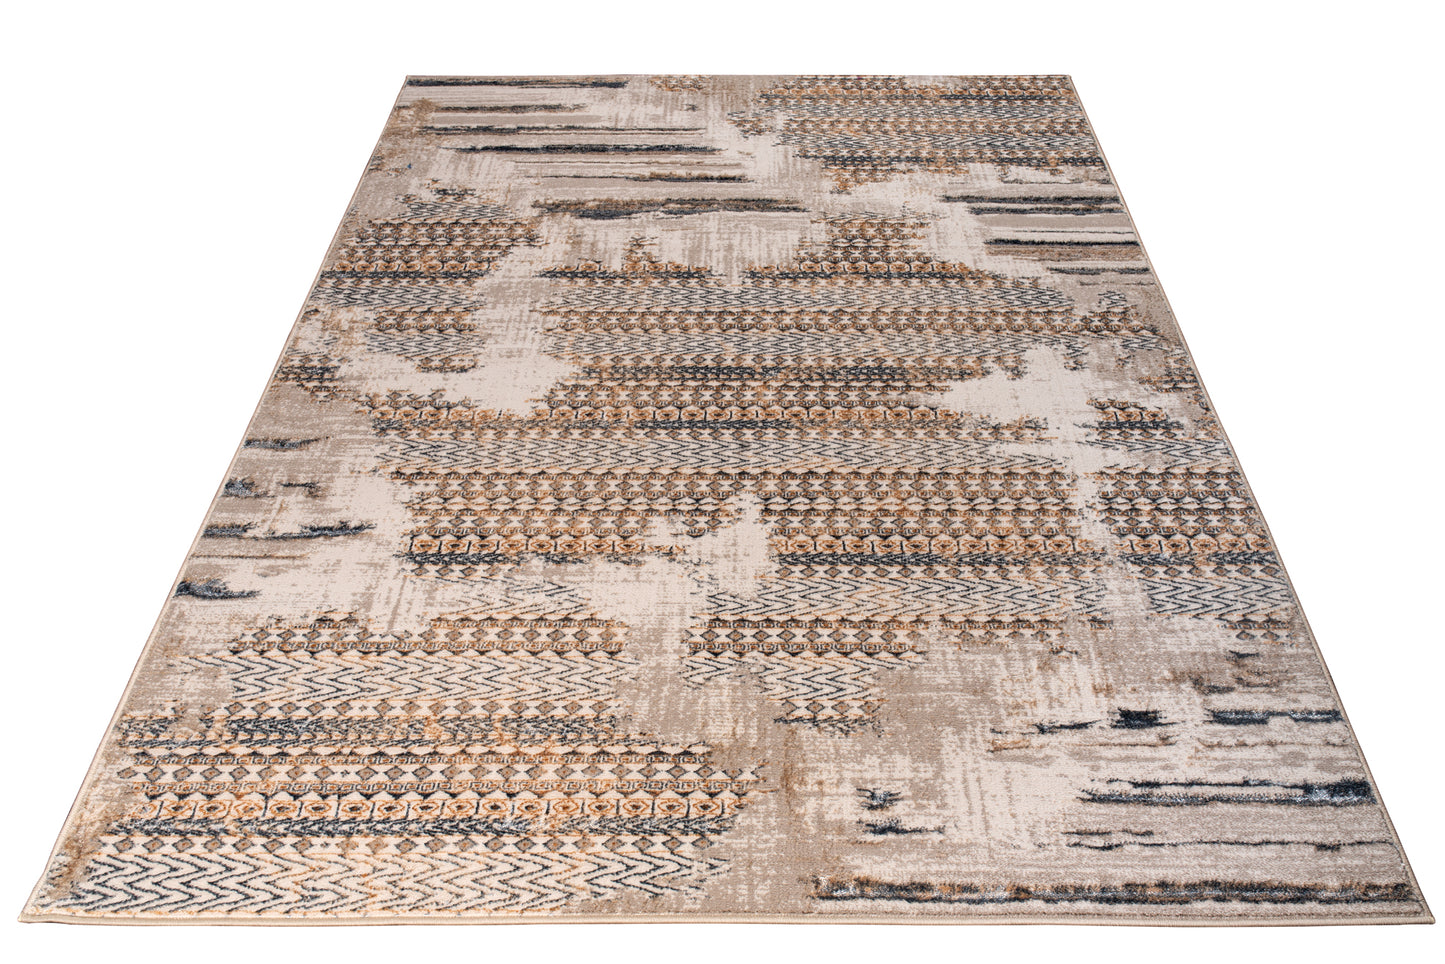 beige brown grey metalic abstract rustic modern contemporary area rug 6x8, 6x9 ft Living Room, Bedroom, Dining Area, Kitchen Carpet